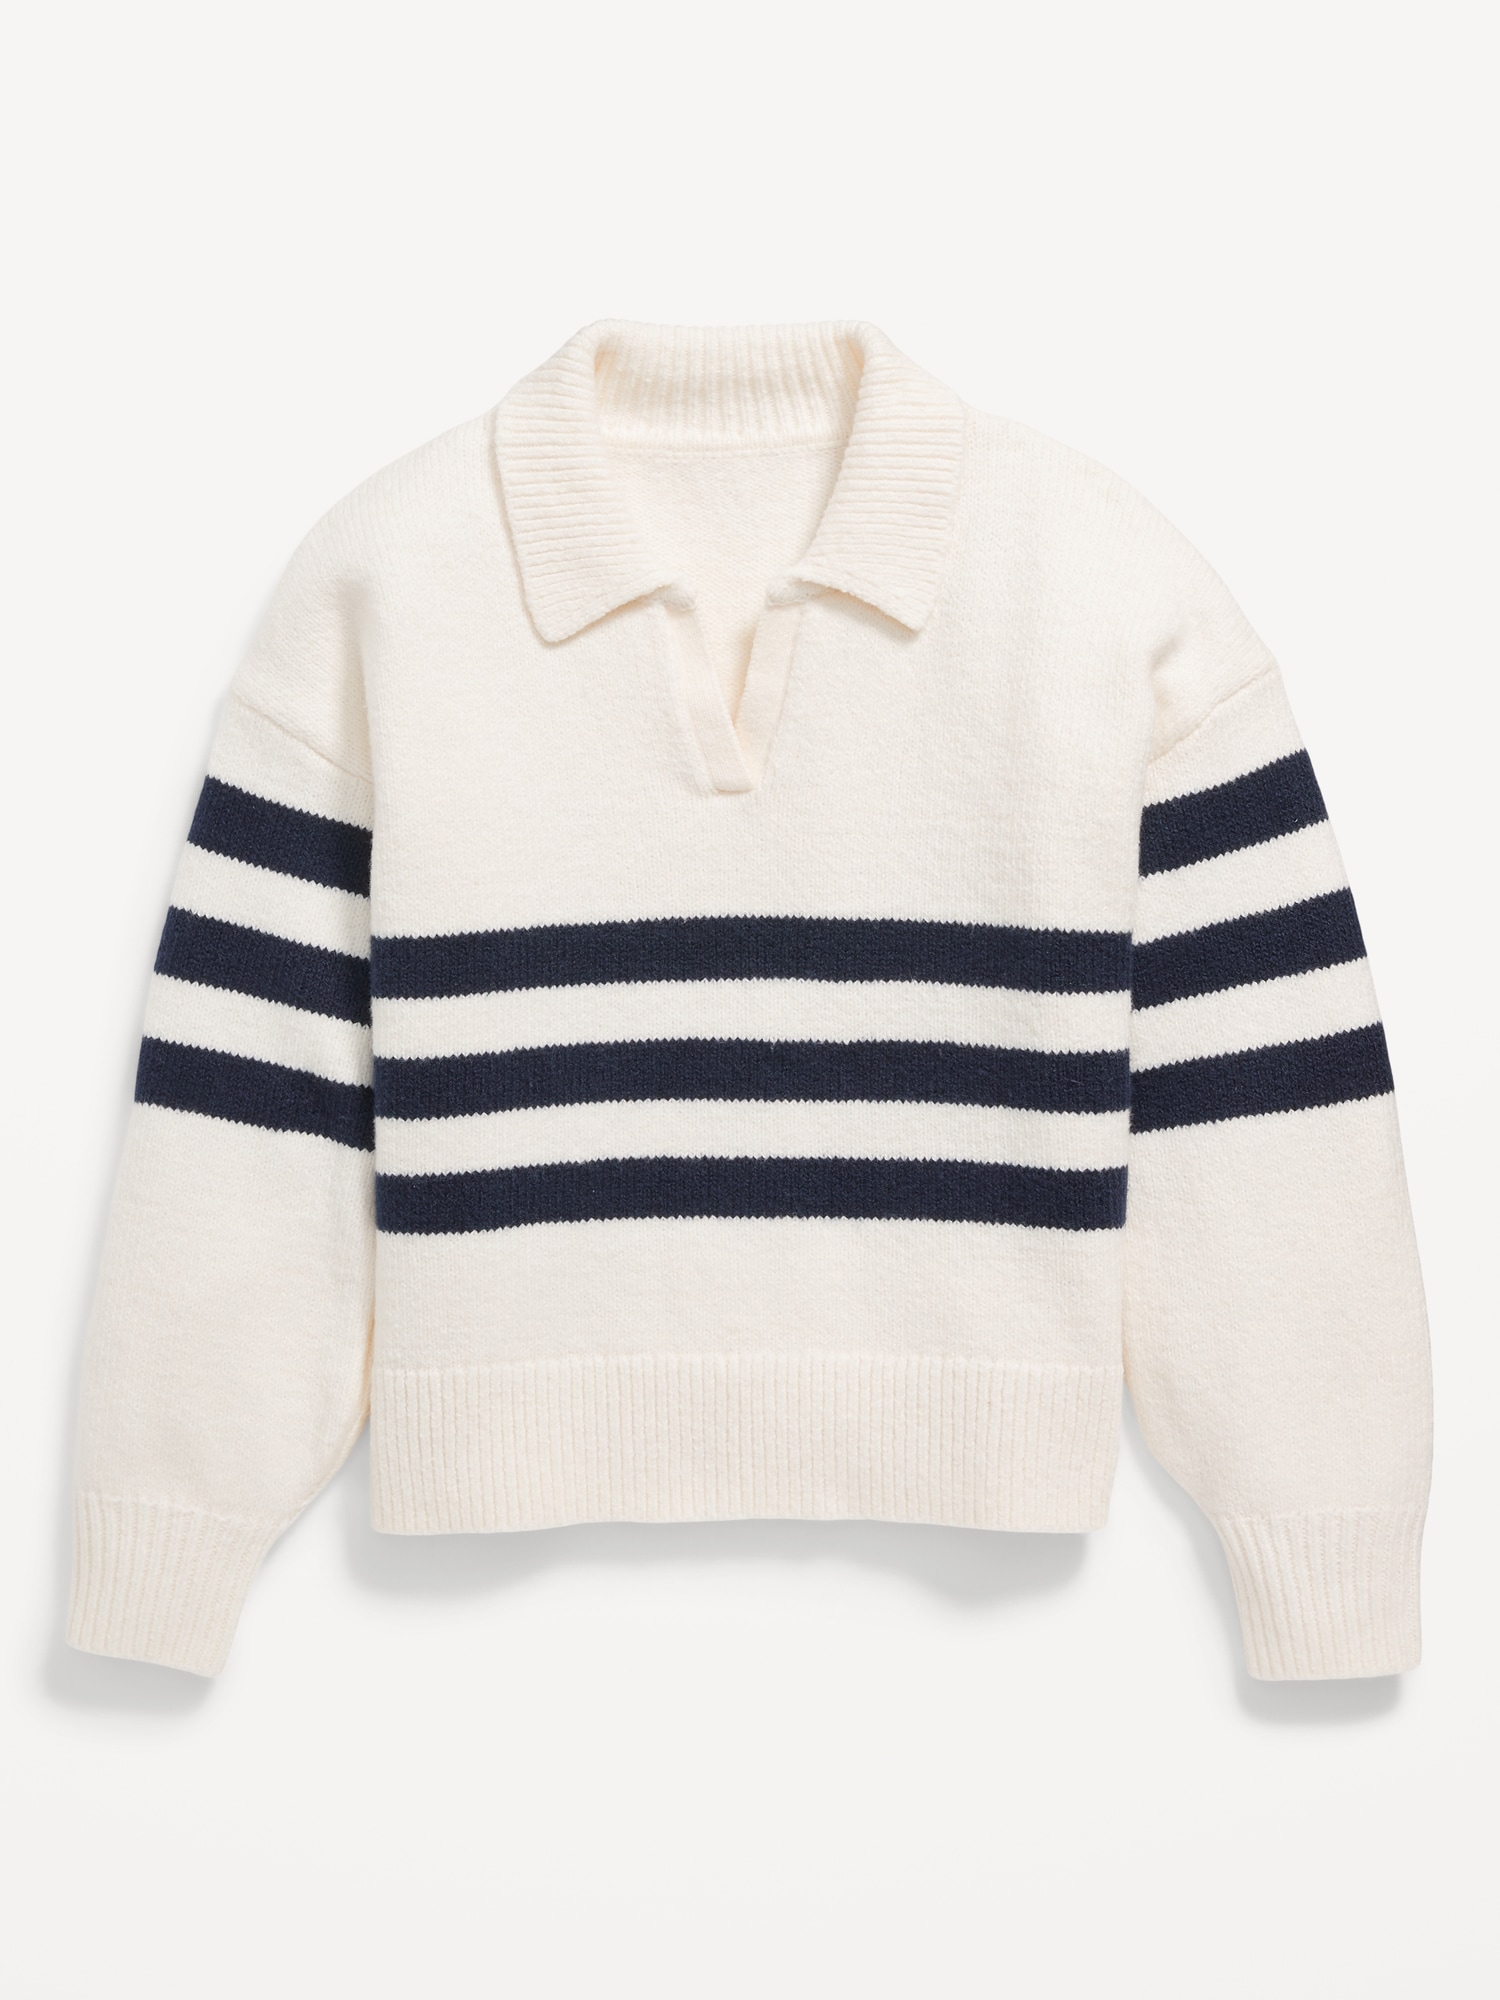 SoSoft Collared Sweater for Girls